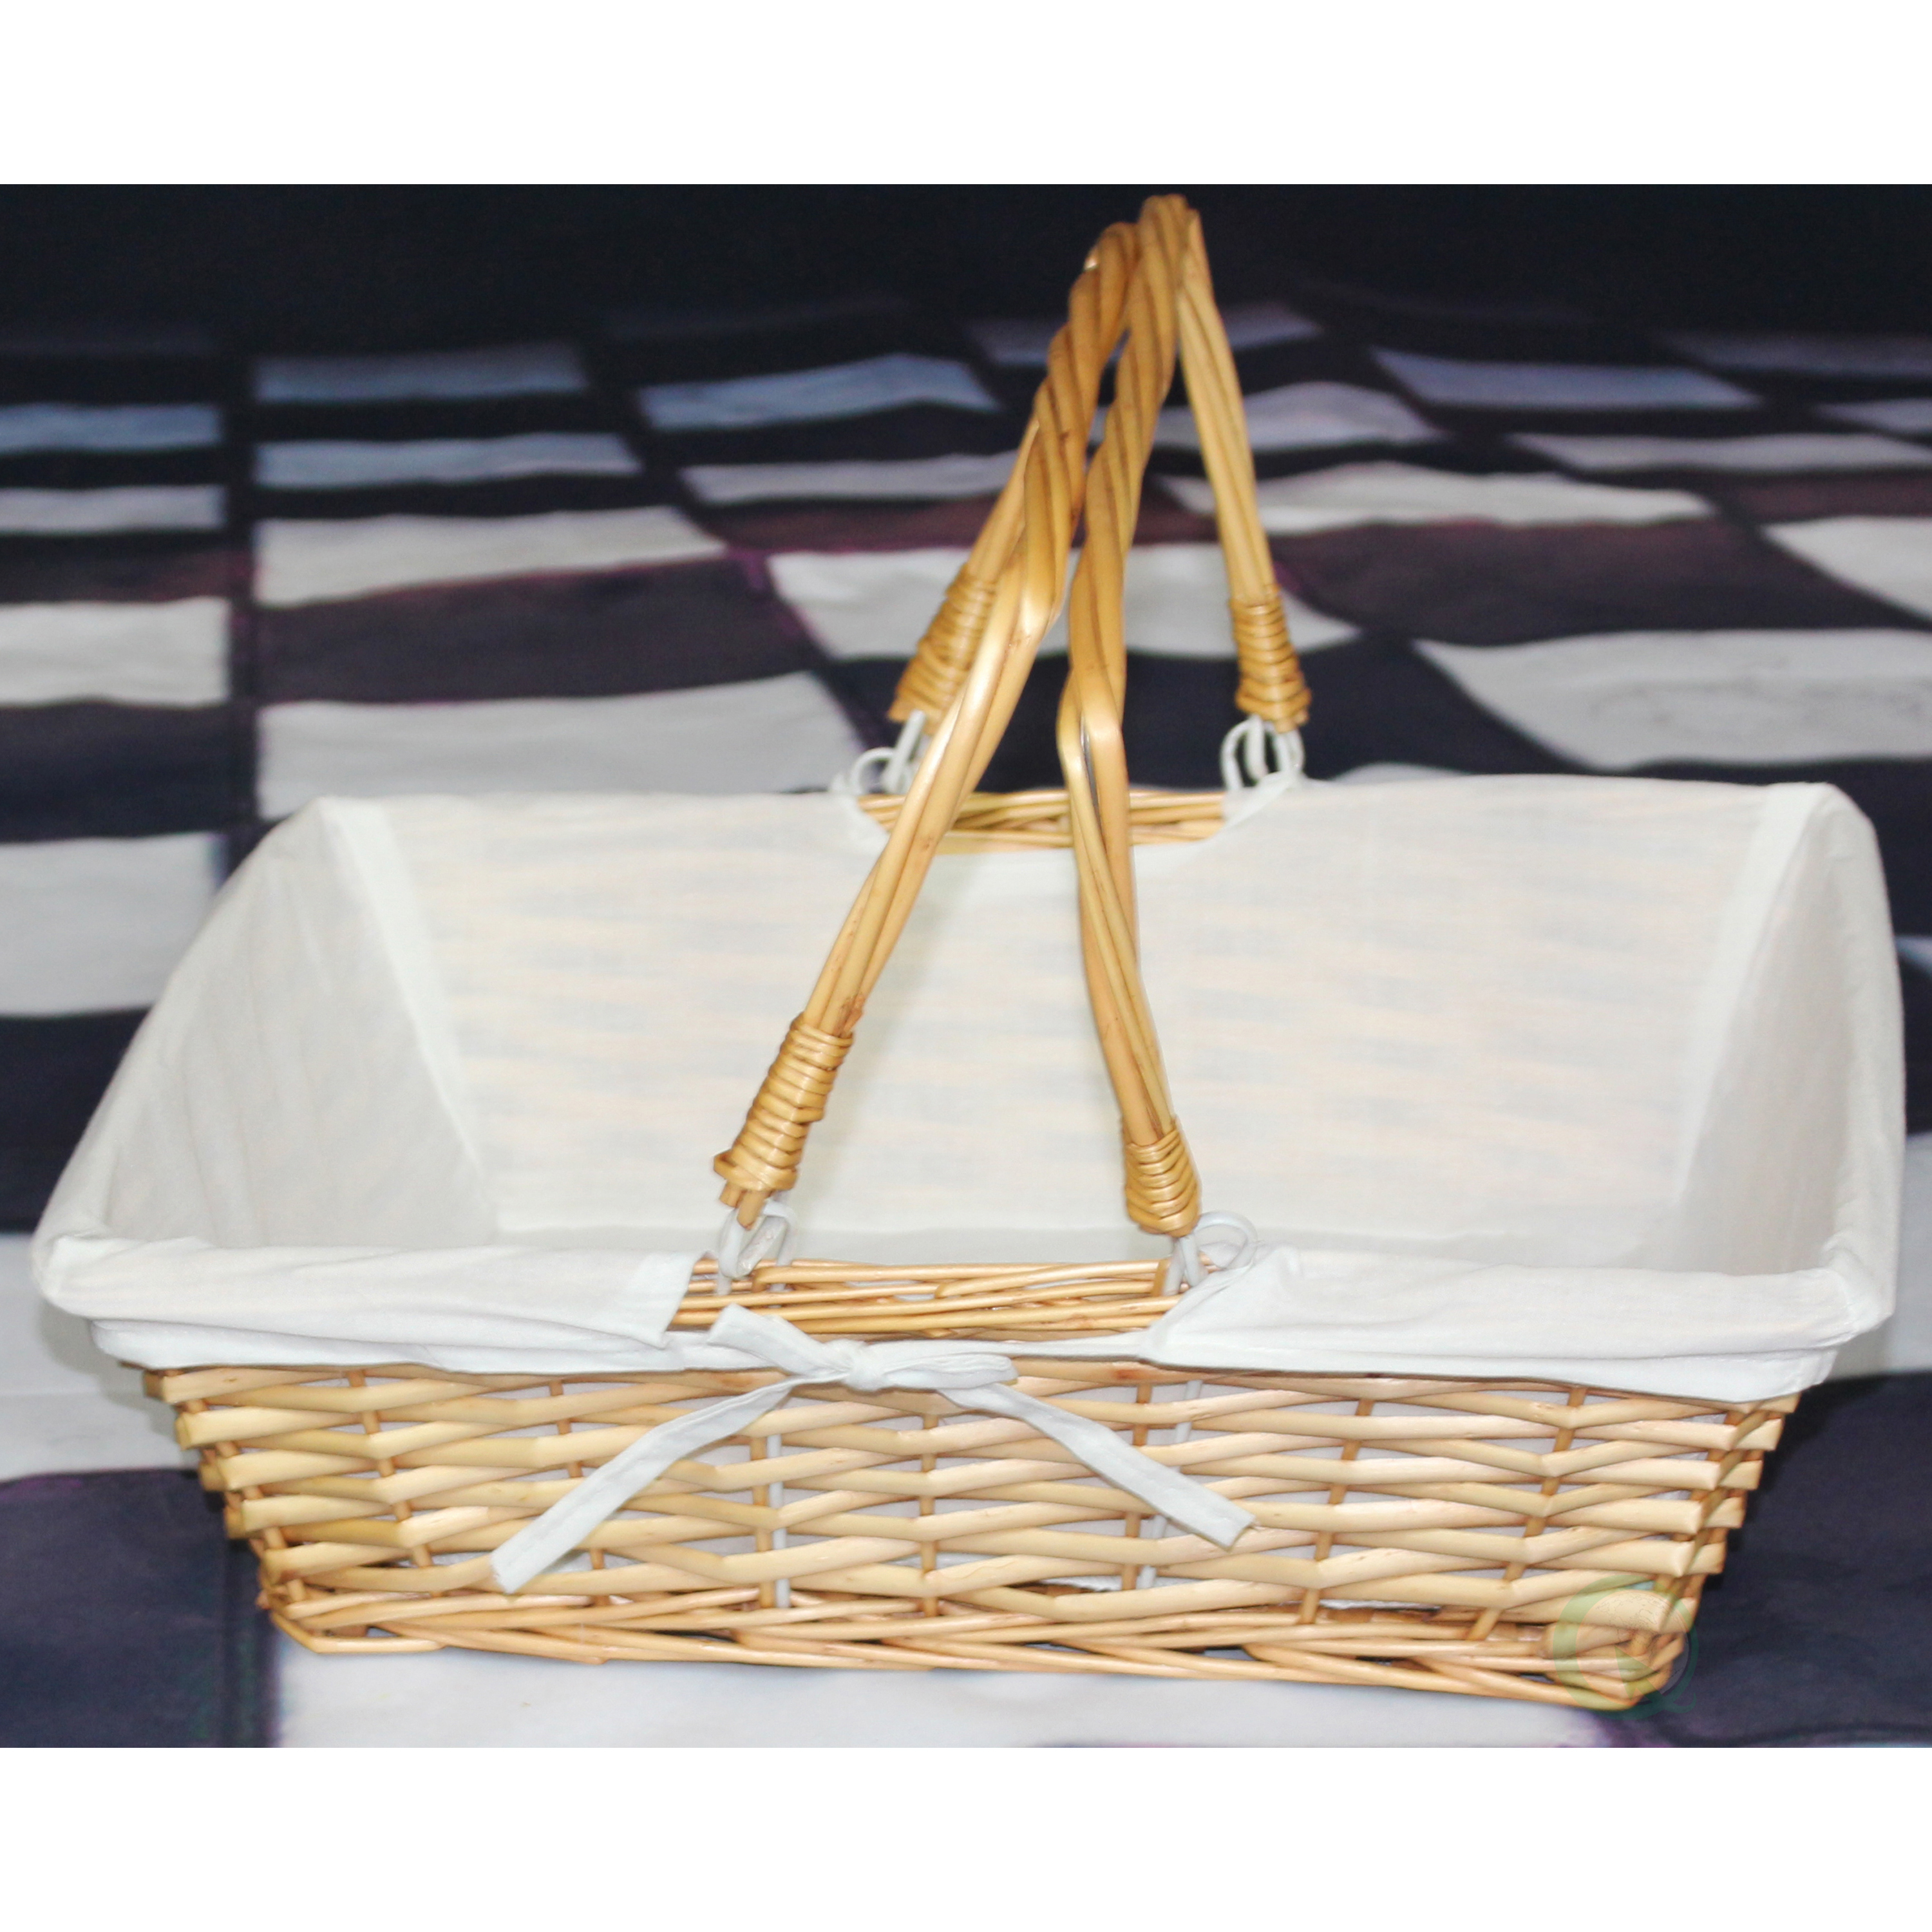 Rectangular Willow Basket With White Fabric Lining